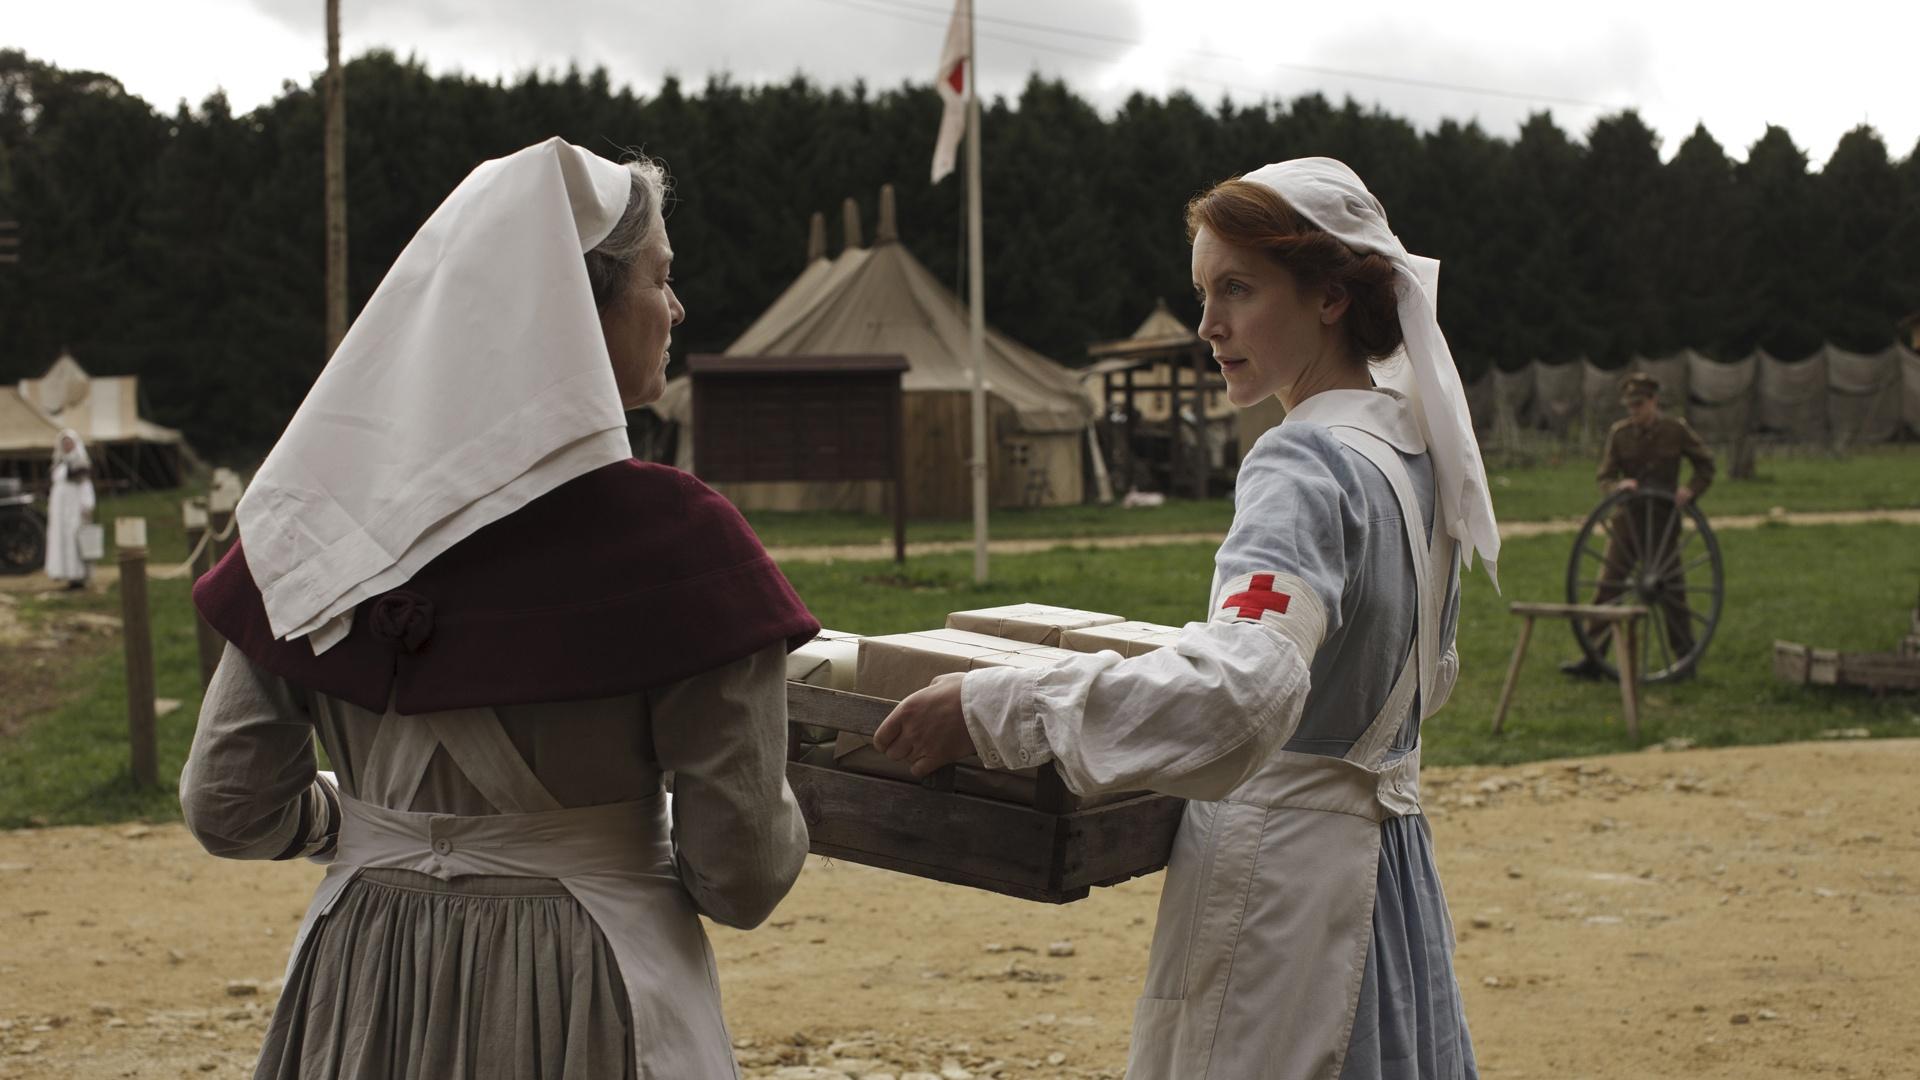 Sister Margaret Quayle (Kerry Fox) and Rosalie Berwick (Marianne Oldham) in a scene from Episode 3.